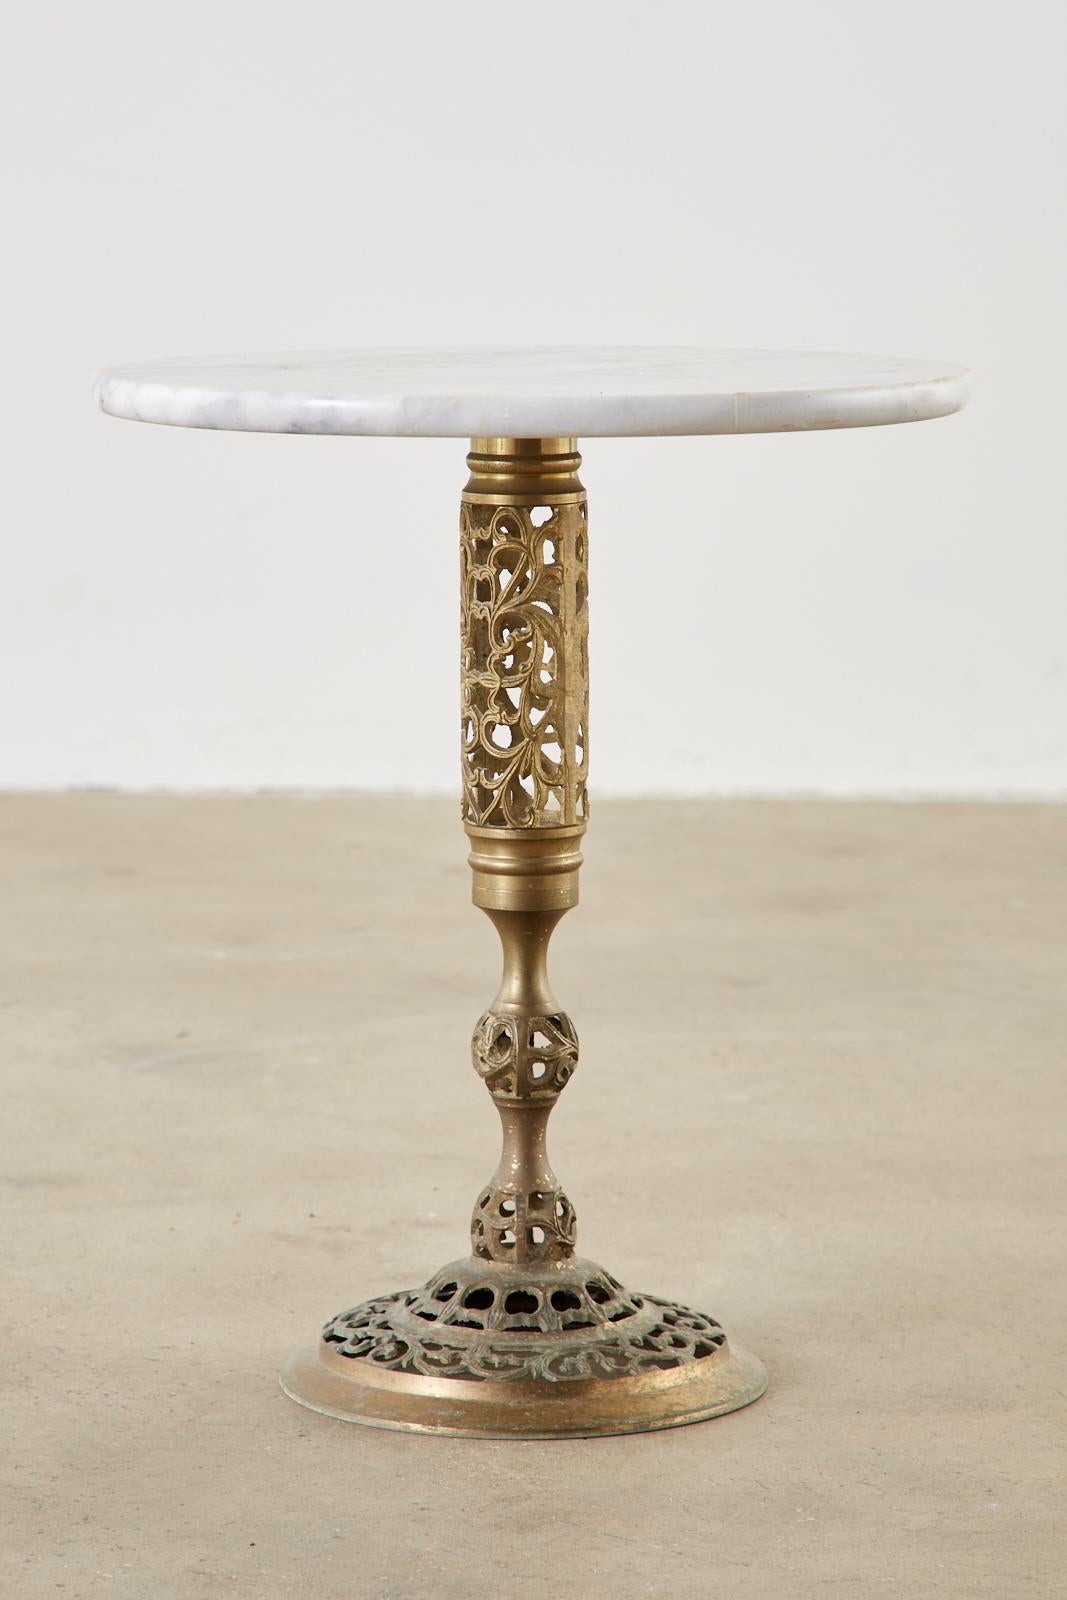 Stunning Chinese Hollywood Regency brass drinks table featuring a round Carrara marble top. The pedestal base is decorated with a pierced or reticulated open fretwork pattern with a vine motif. The brass has a beautifully aged, patinated finish.